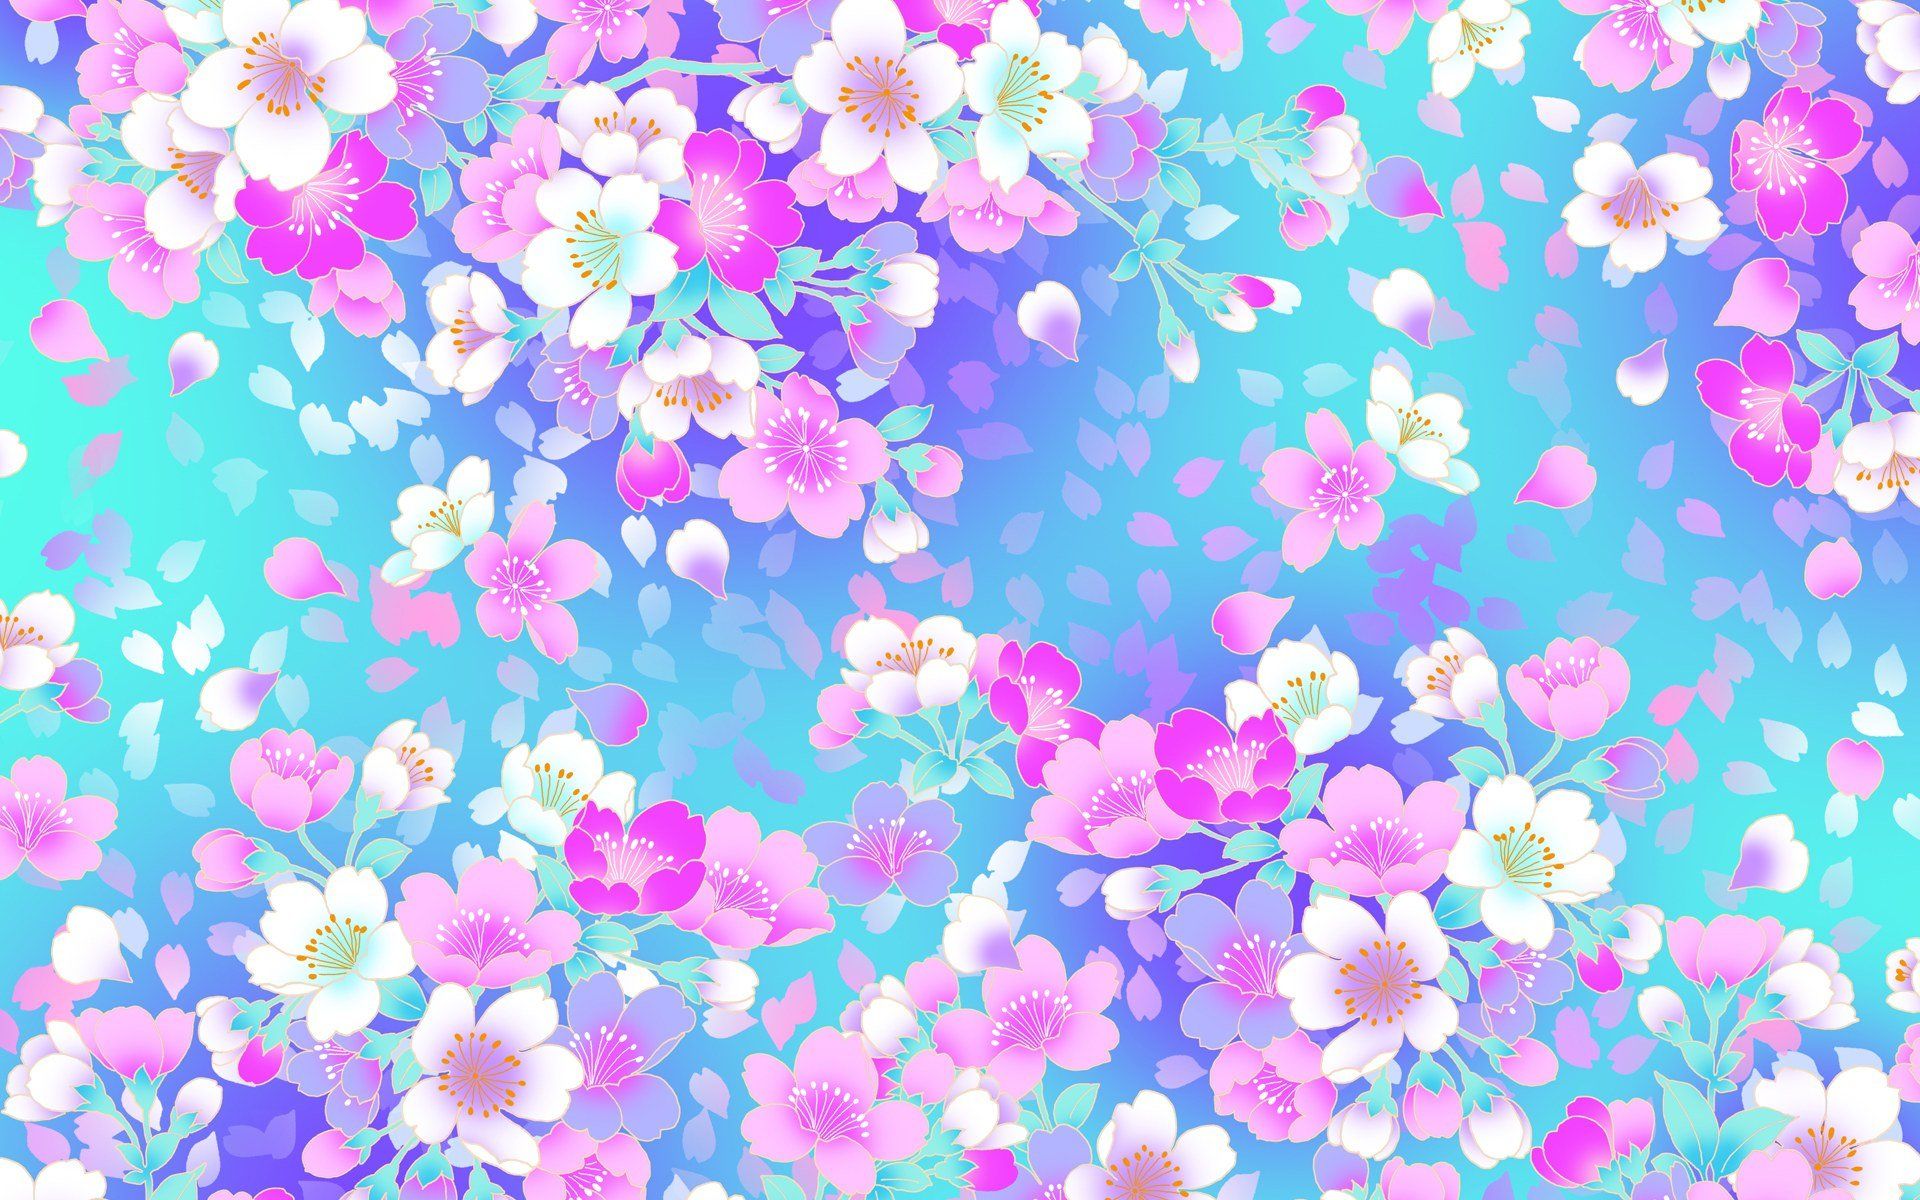 44+] Colorful Girly Wallpapers